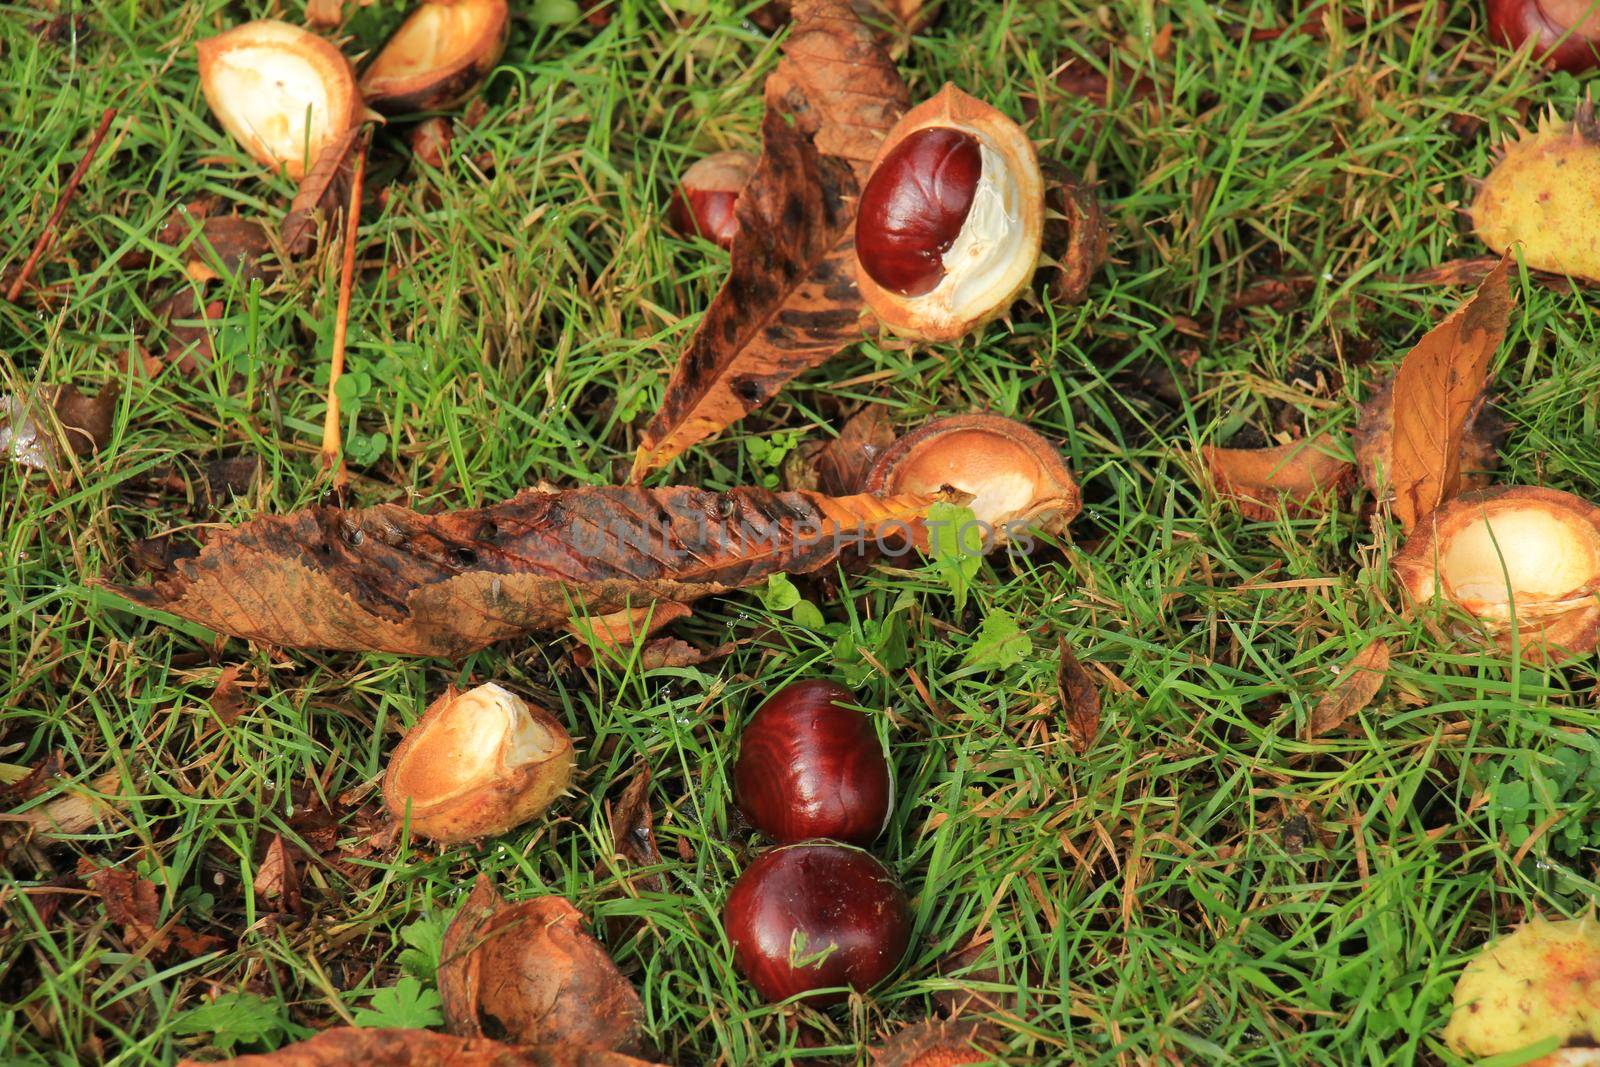 Chestnuts the grass in an autumn forest